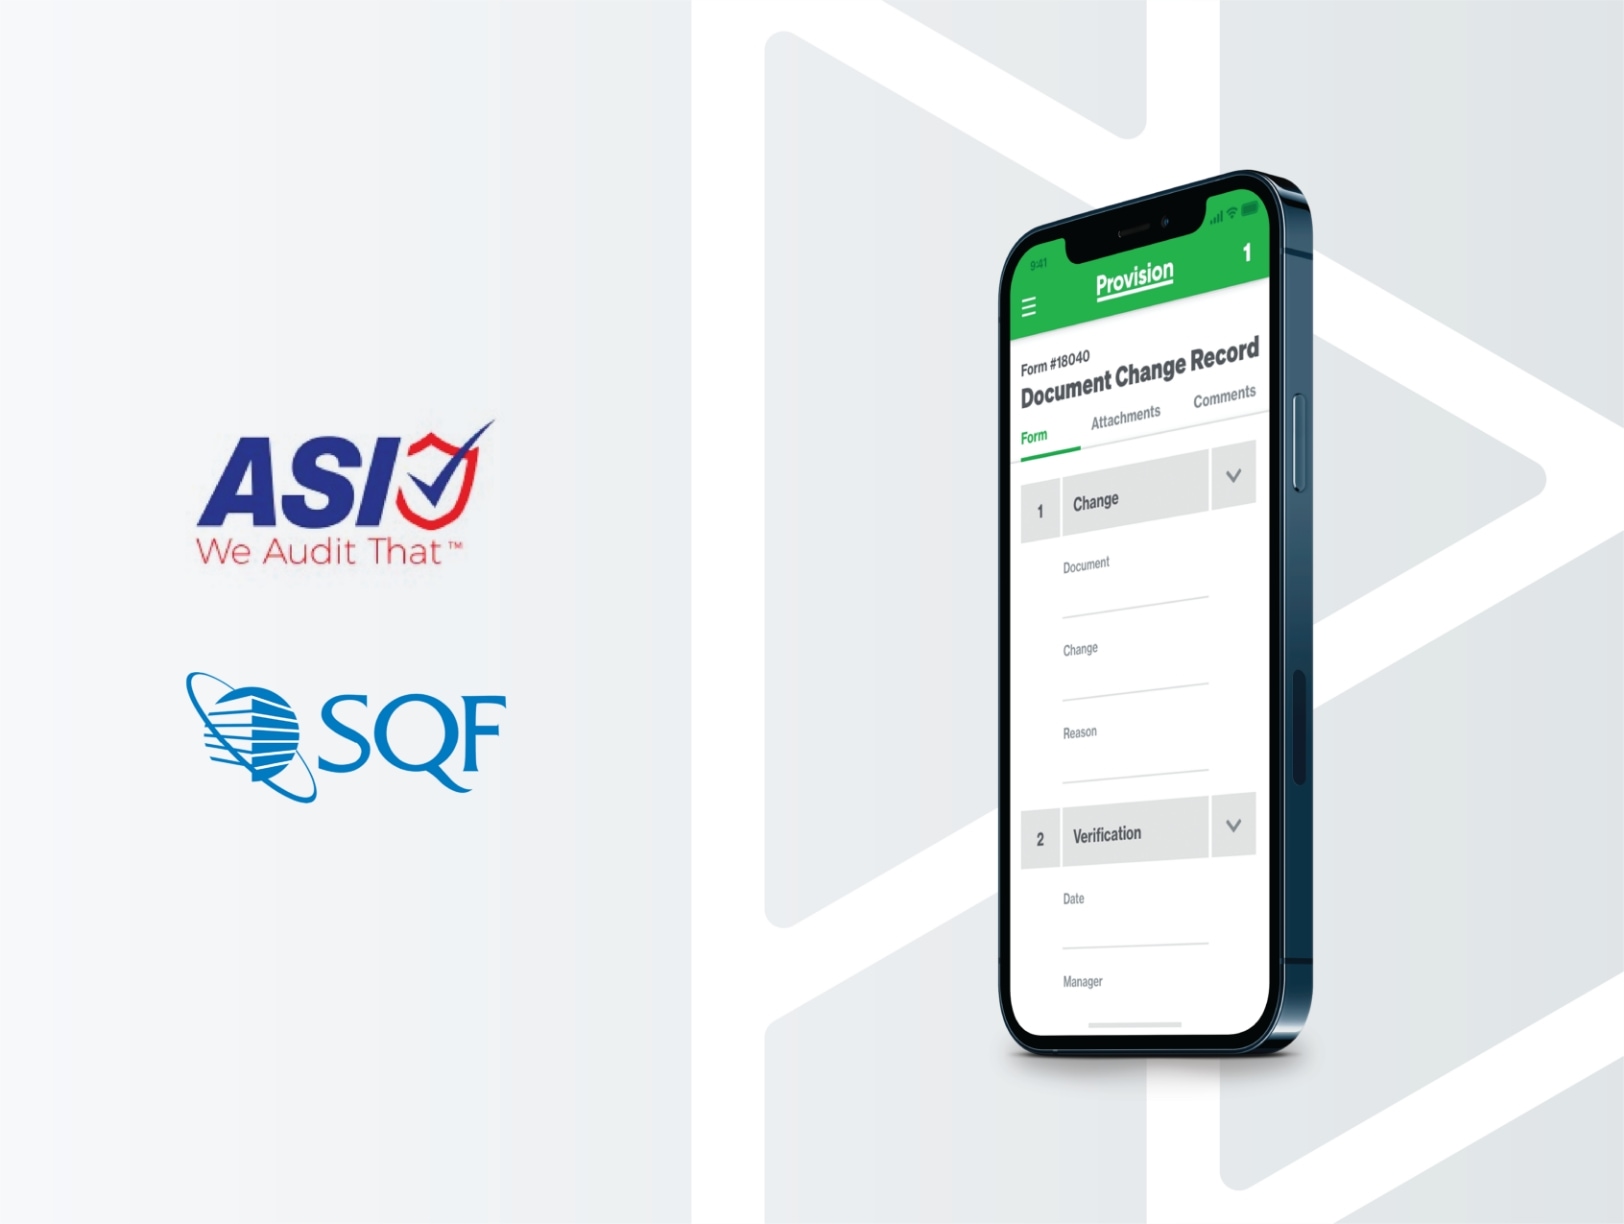 asi and sqf logos beside document change record form on mobile